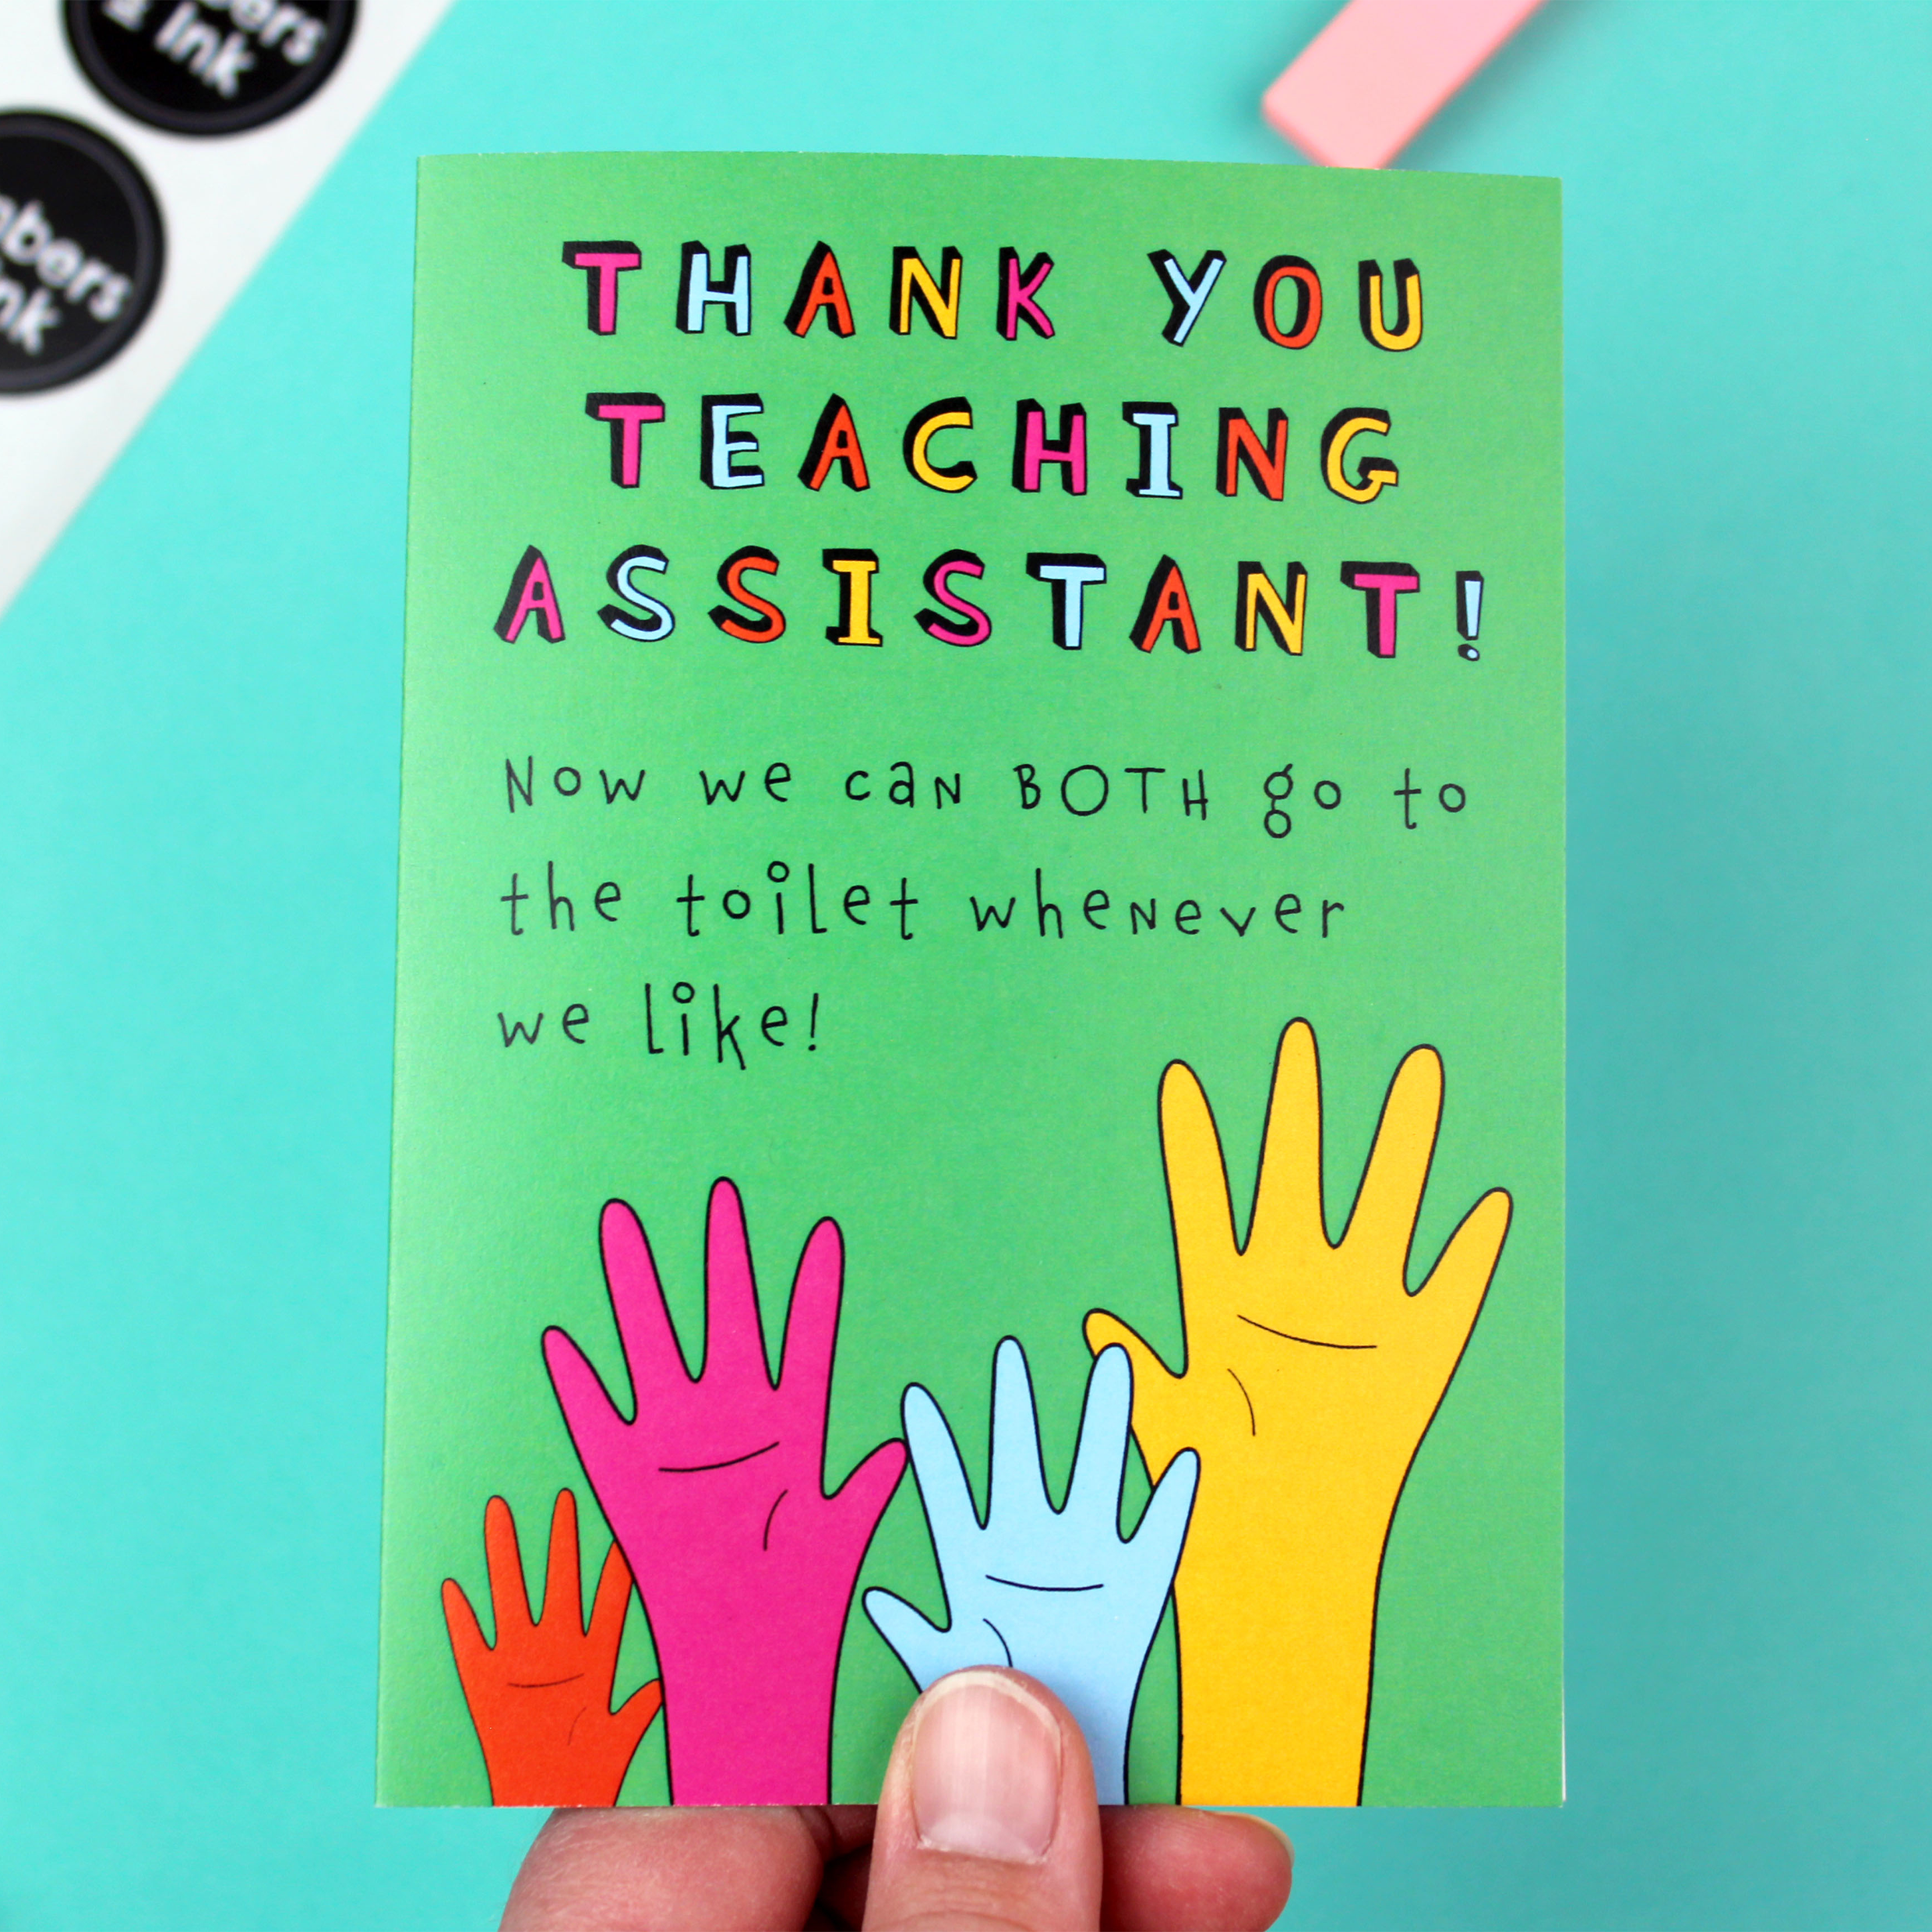 A hand holds a brightly coloured card. The card is green an features an illustration of four raised hands in orange pink blue and yellow. Above it are the words 'Thank you teaching assistant! Now we can both go to the toilet whenever we like!'